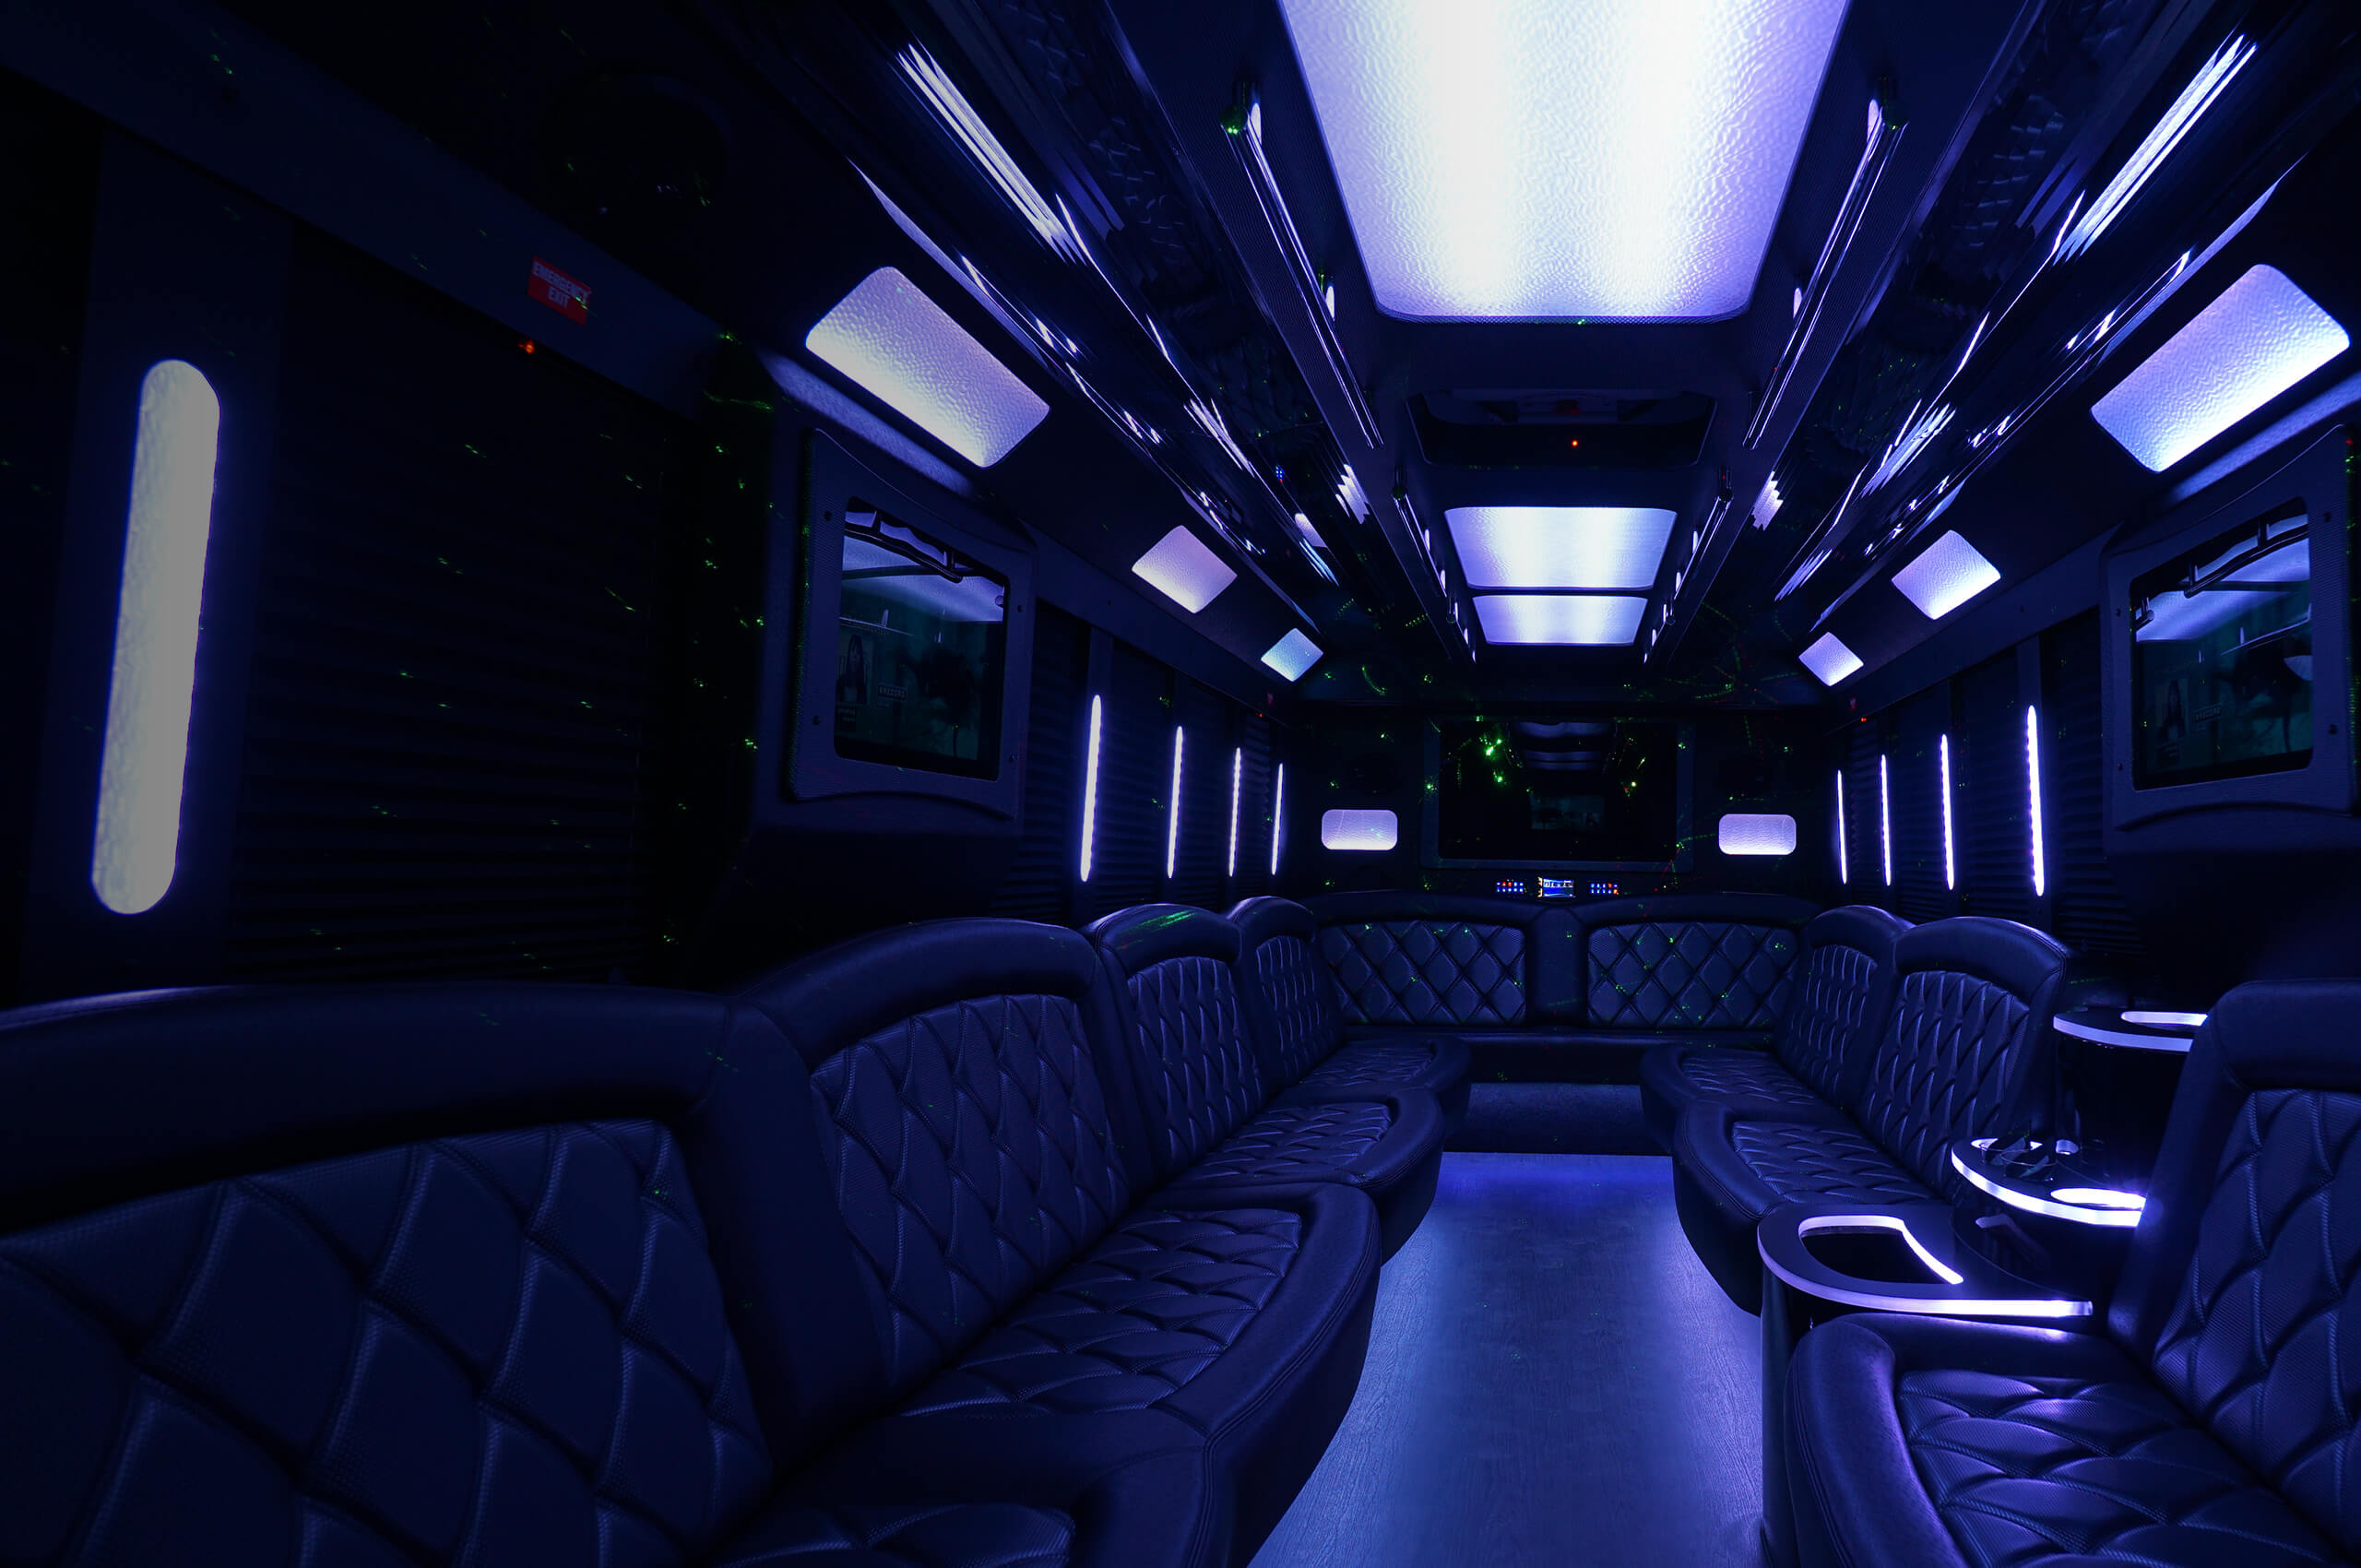 inside the limo bus